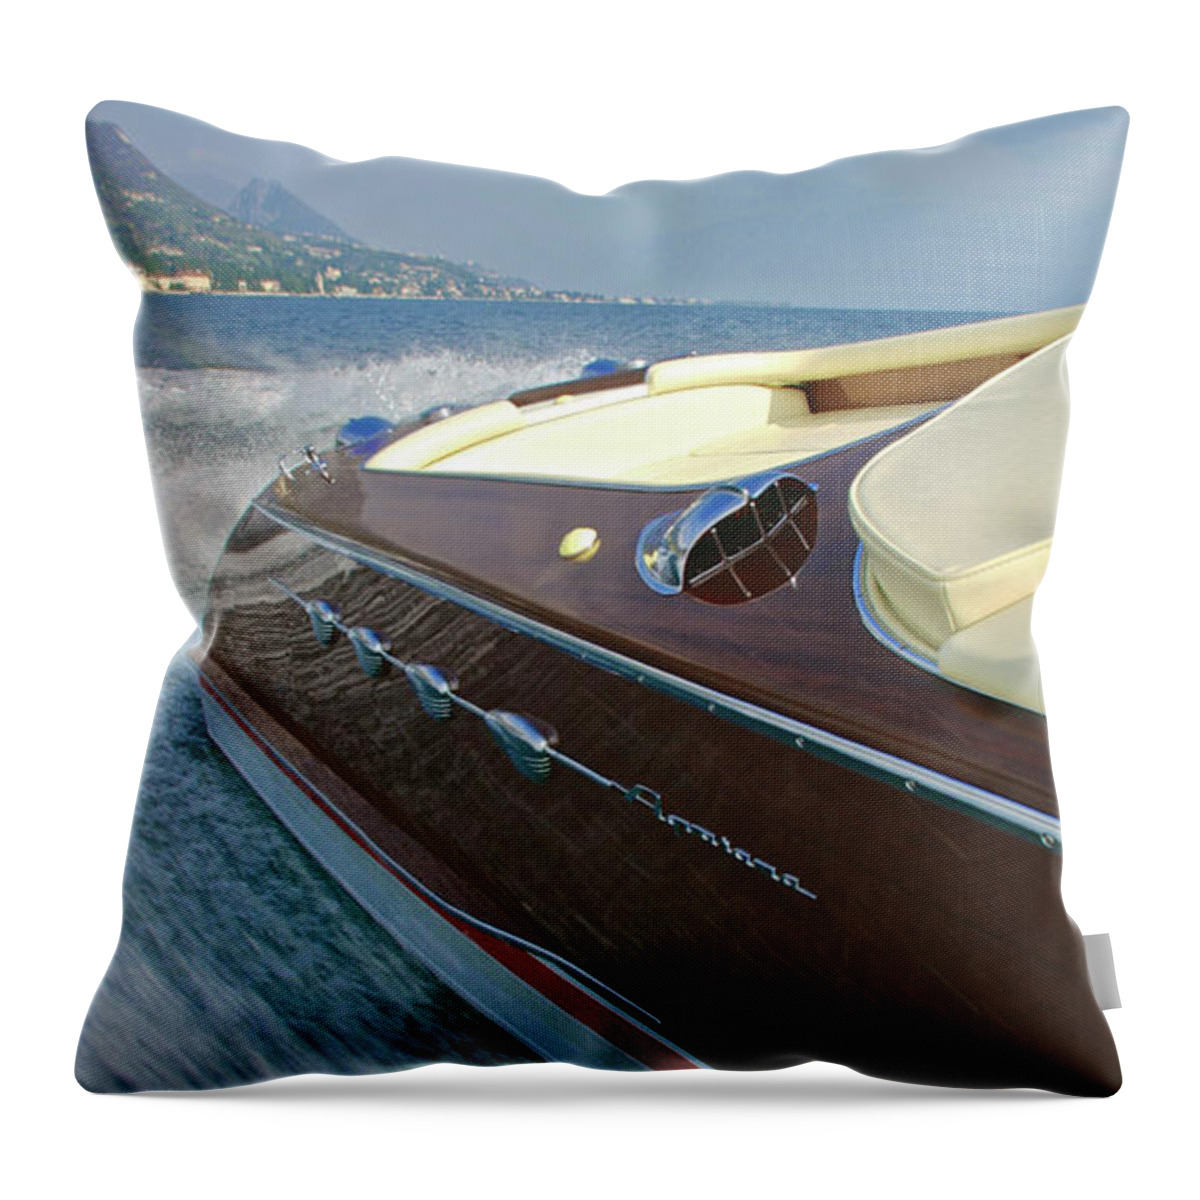 H2omark Throw Pillow featuring the photograph Riva Aquarama #100 by Steven Lapkin